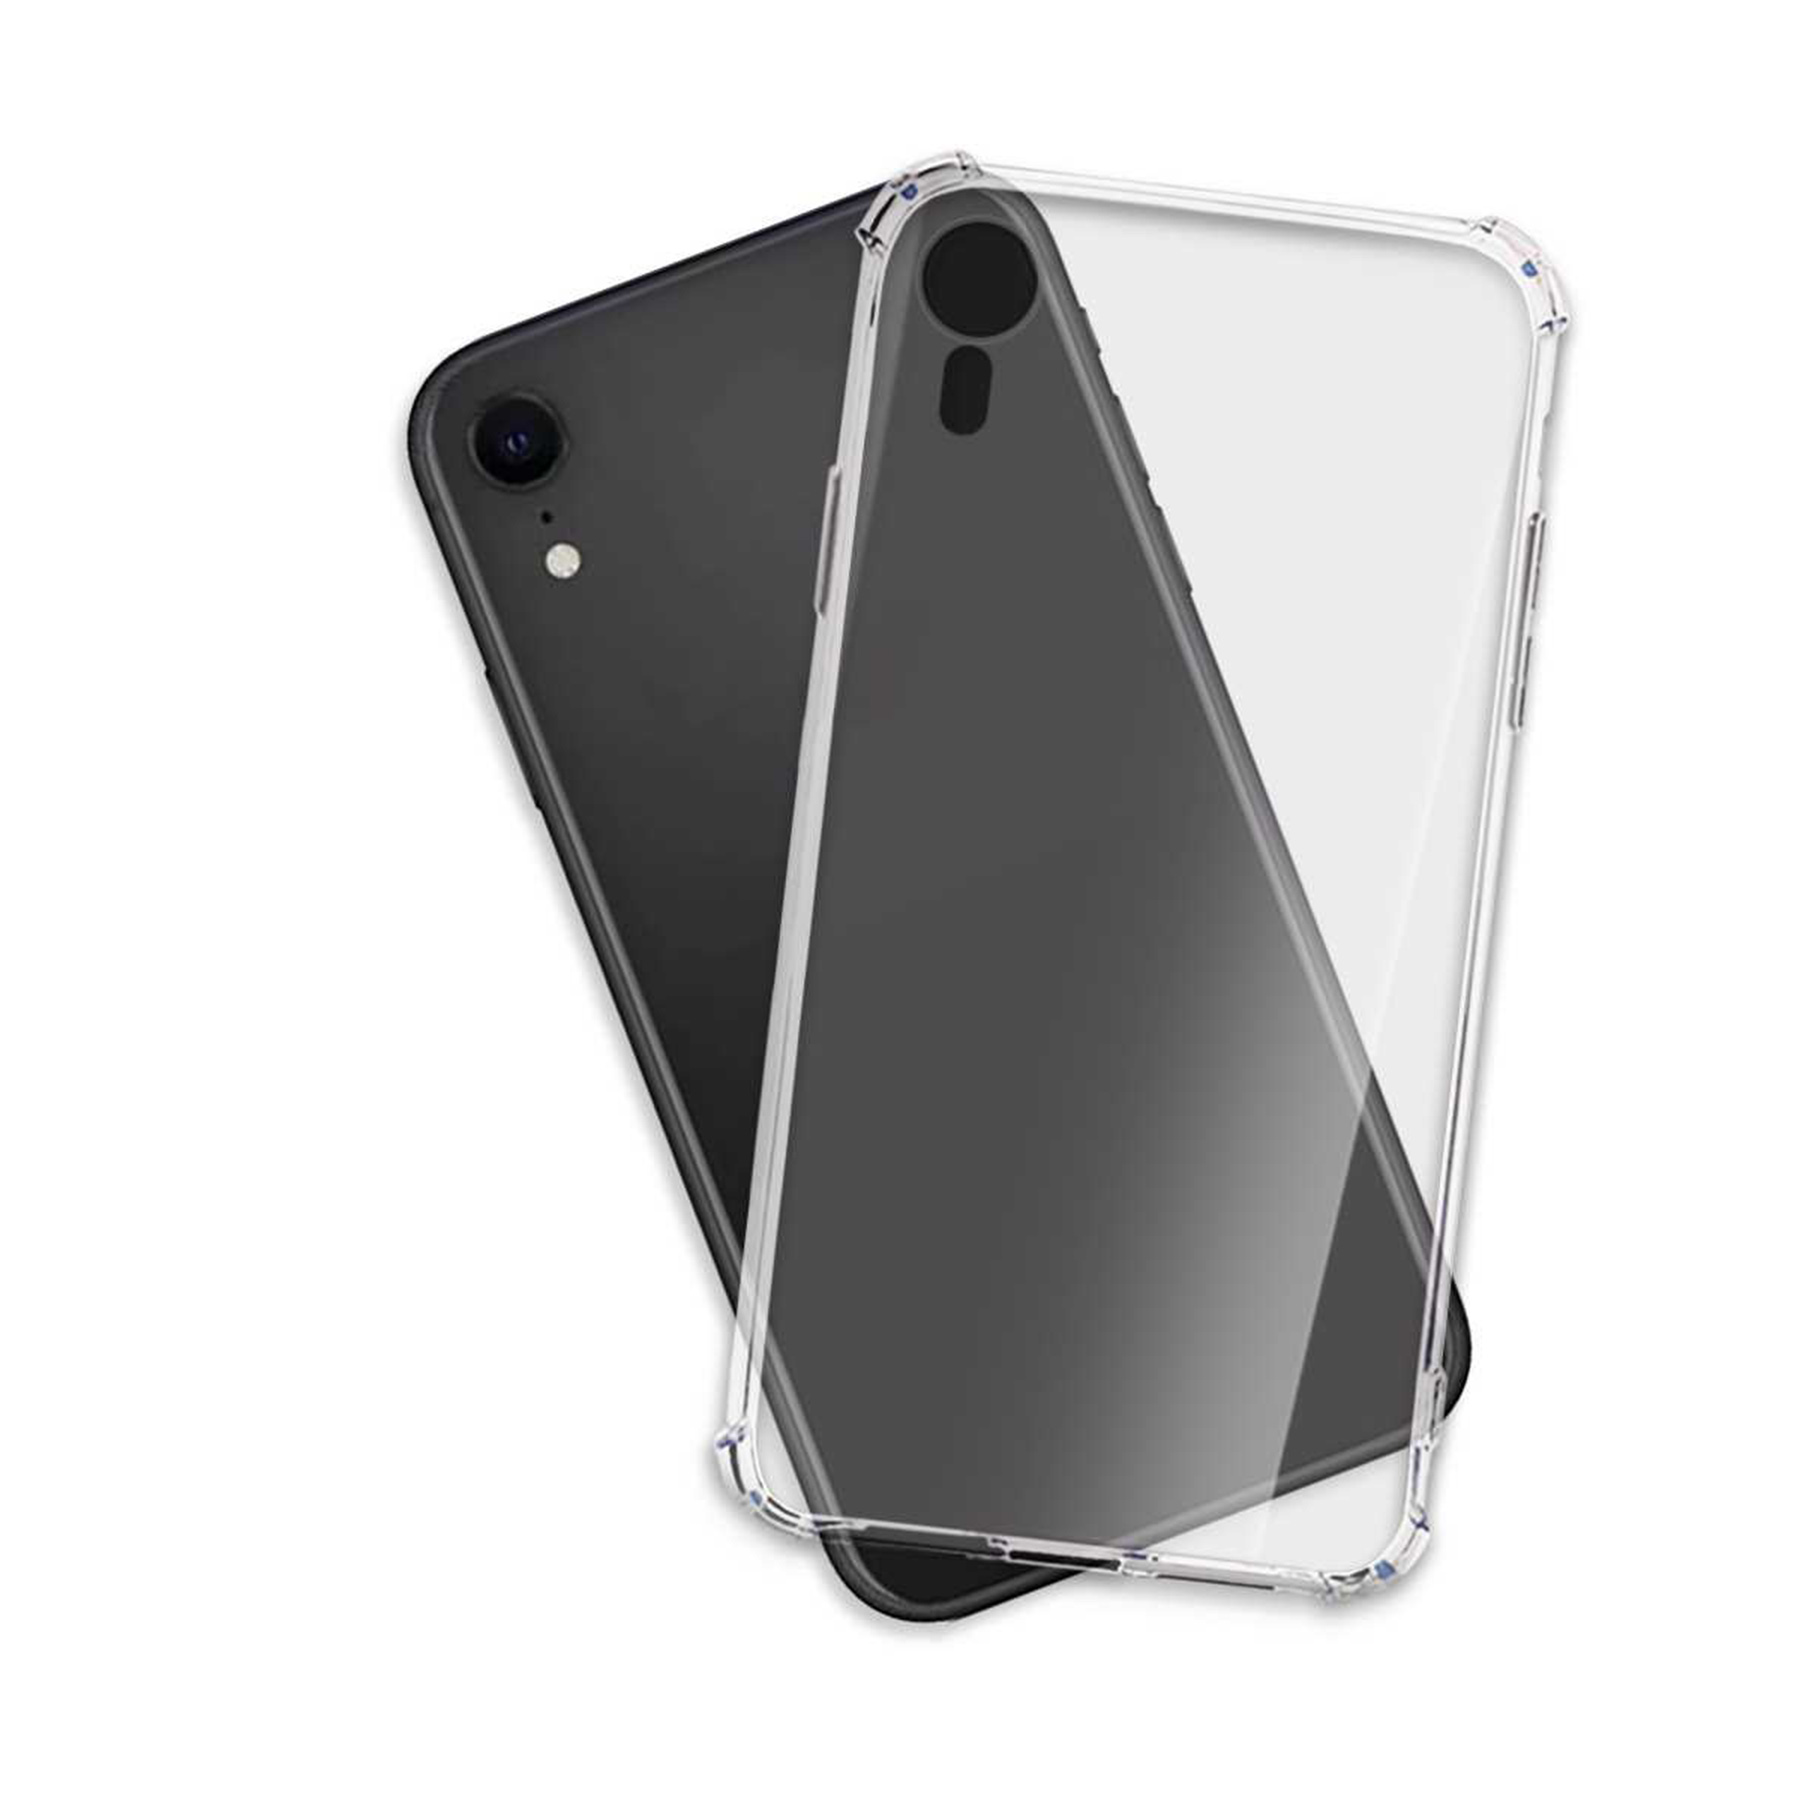 Backcover, Clear Armor XR, ENERGY MORE iPhone Case, MTB Apple, Transparent